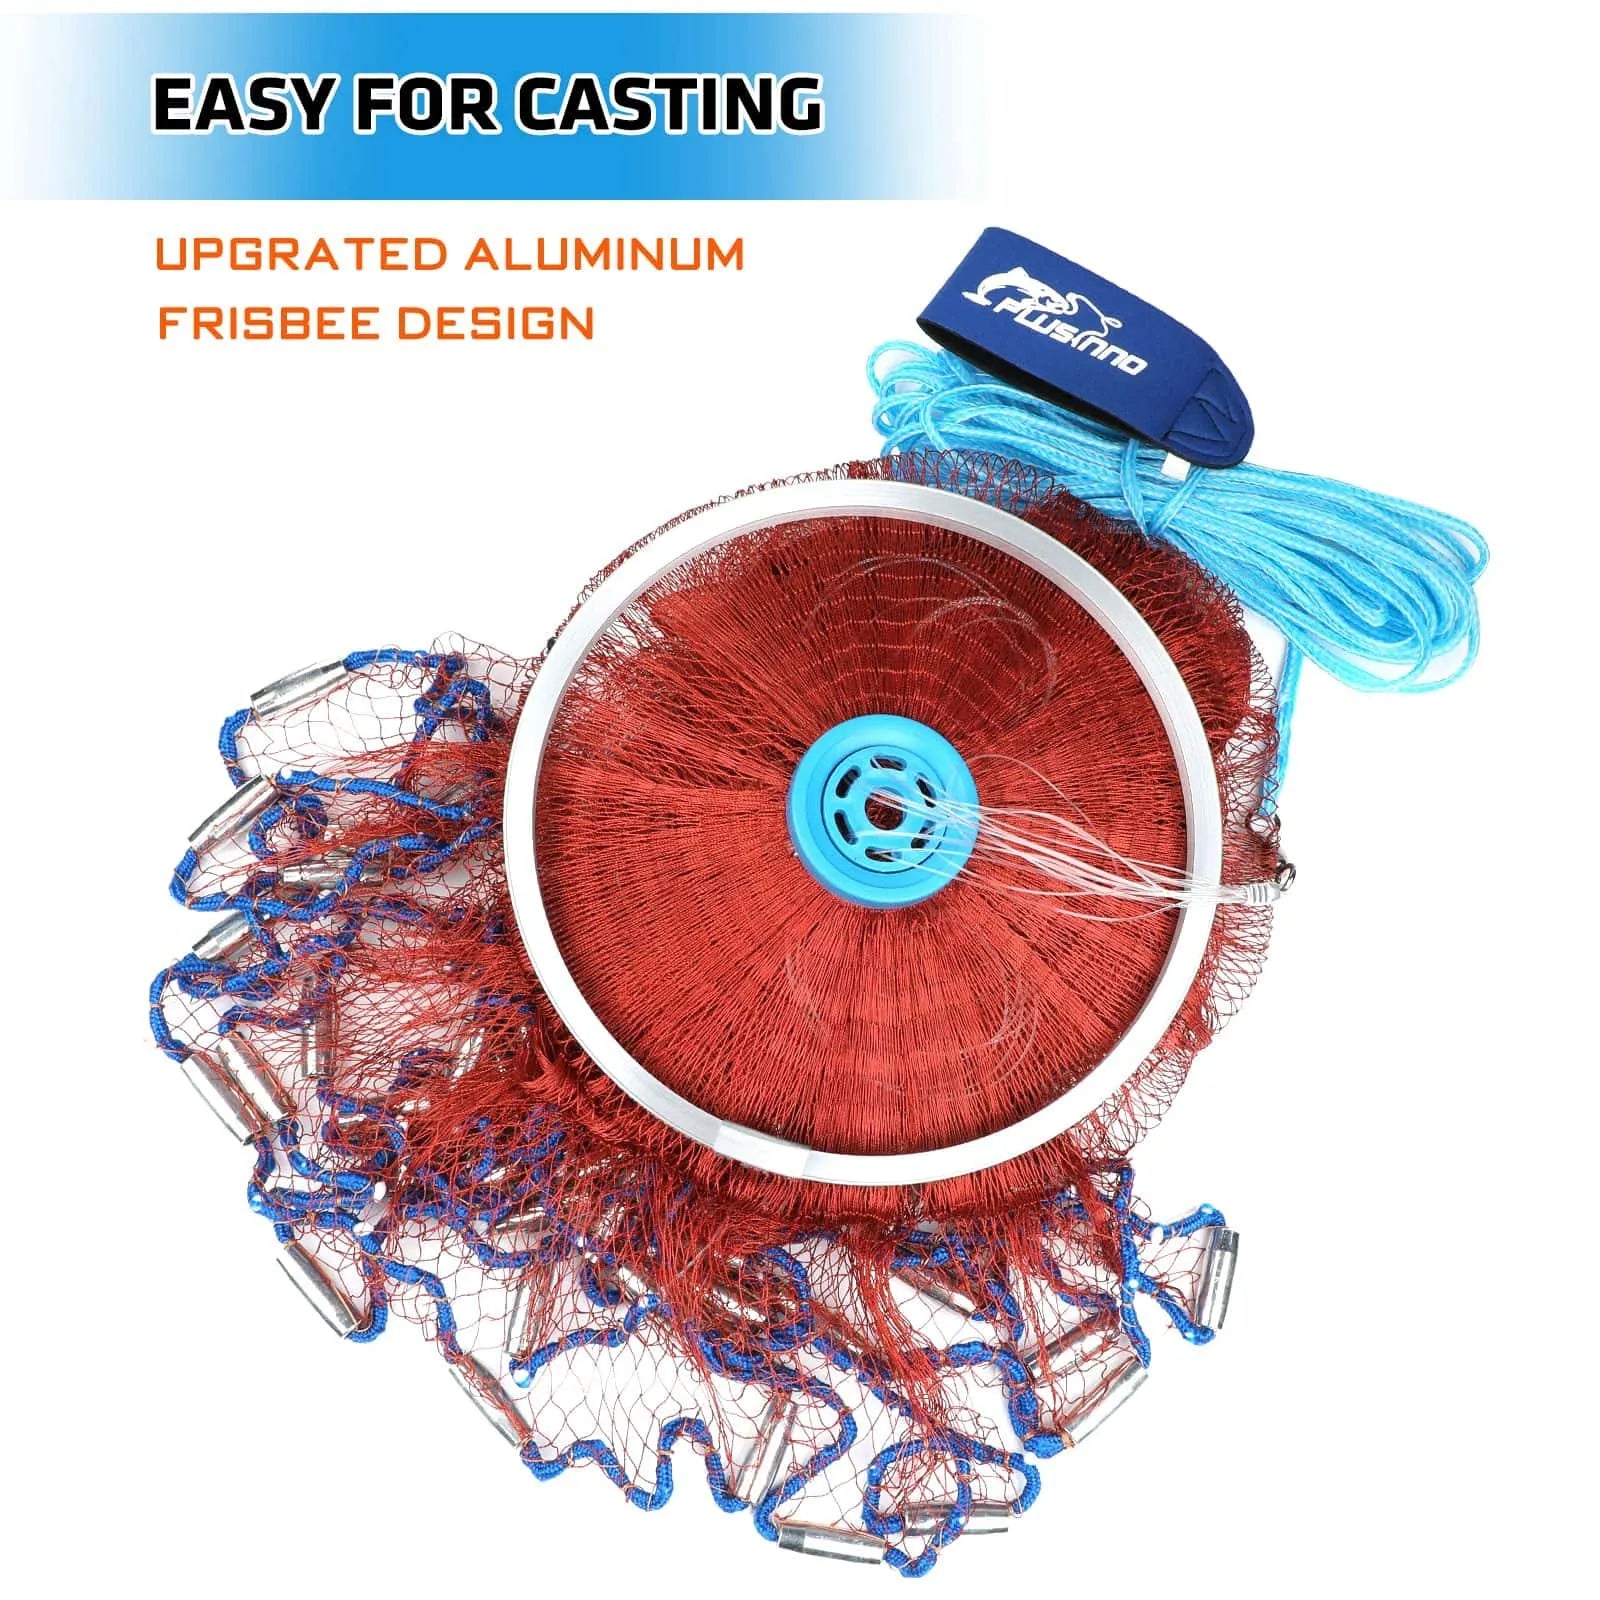 Buy Drasry Saltwater Fishing Cast Net with Aluminum Frisbee for